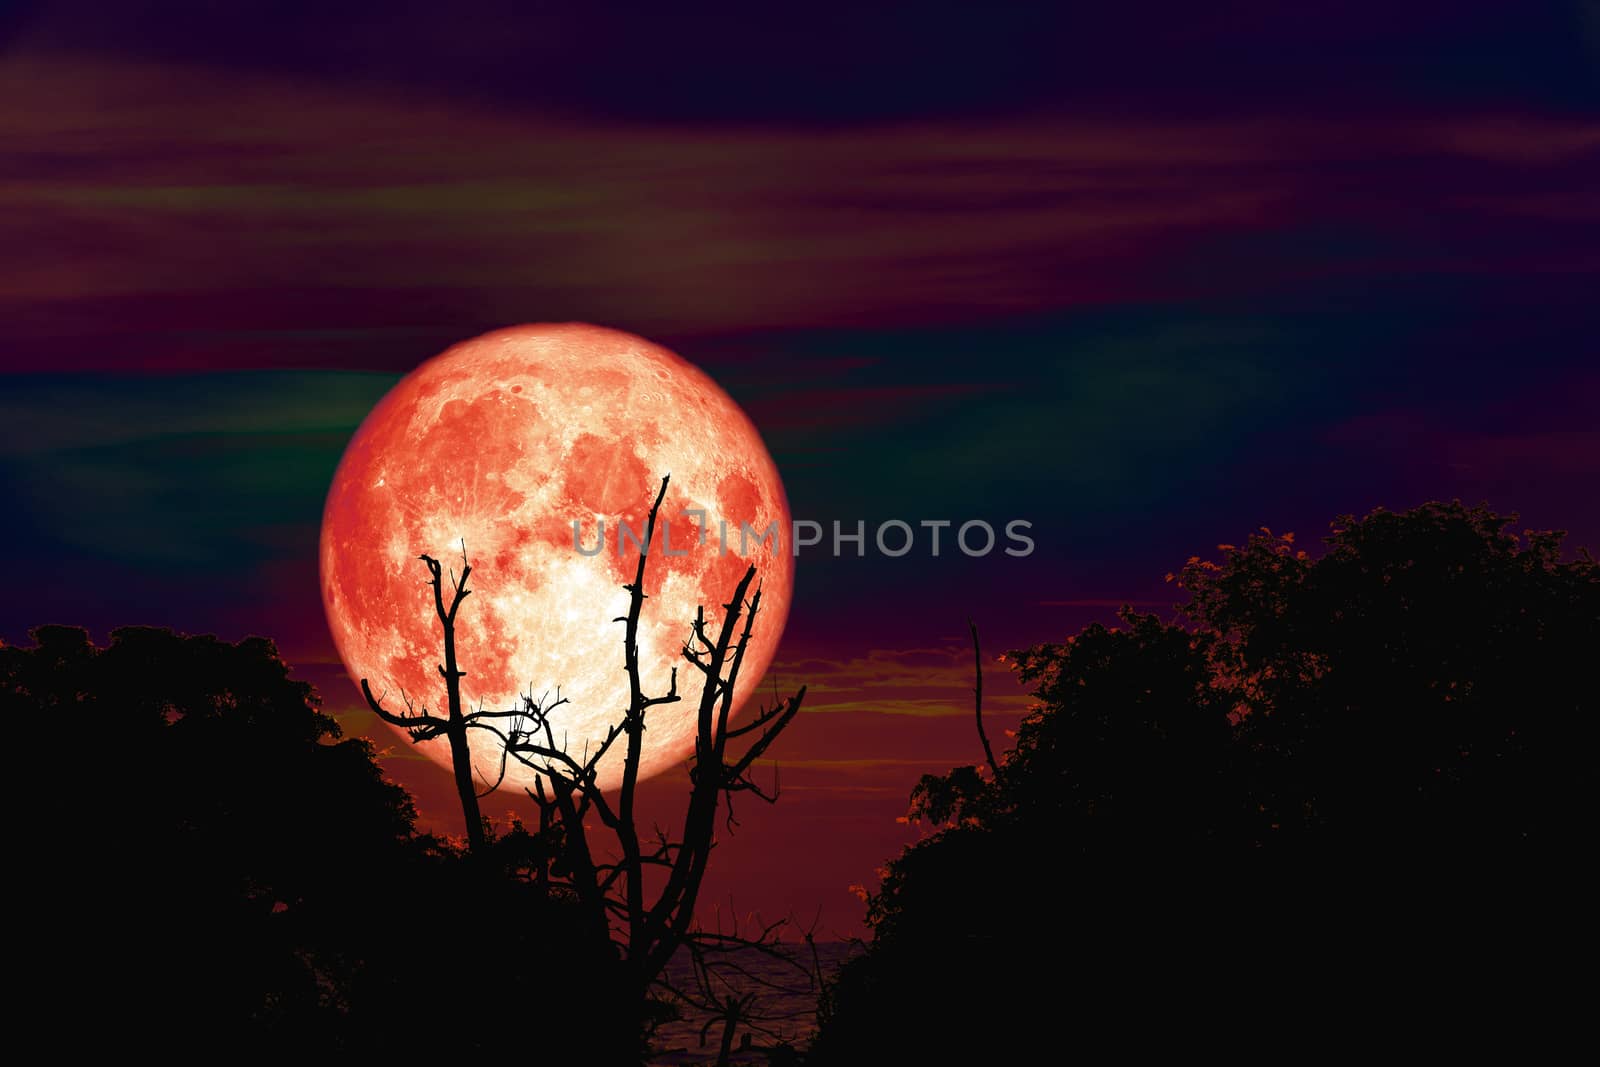 Hunter's moon back over silhouette branch tree in field on evening sky, Elements of this image furnished by NASA